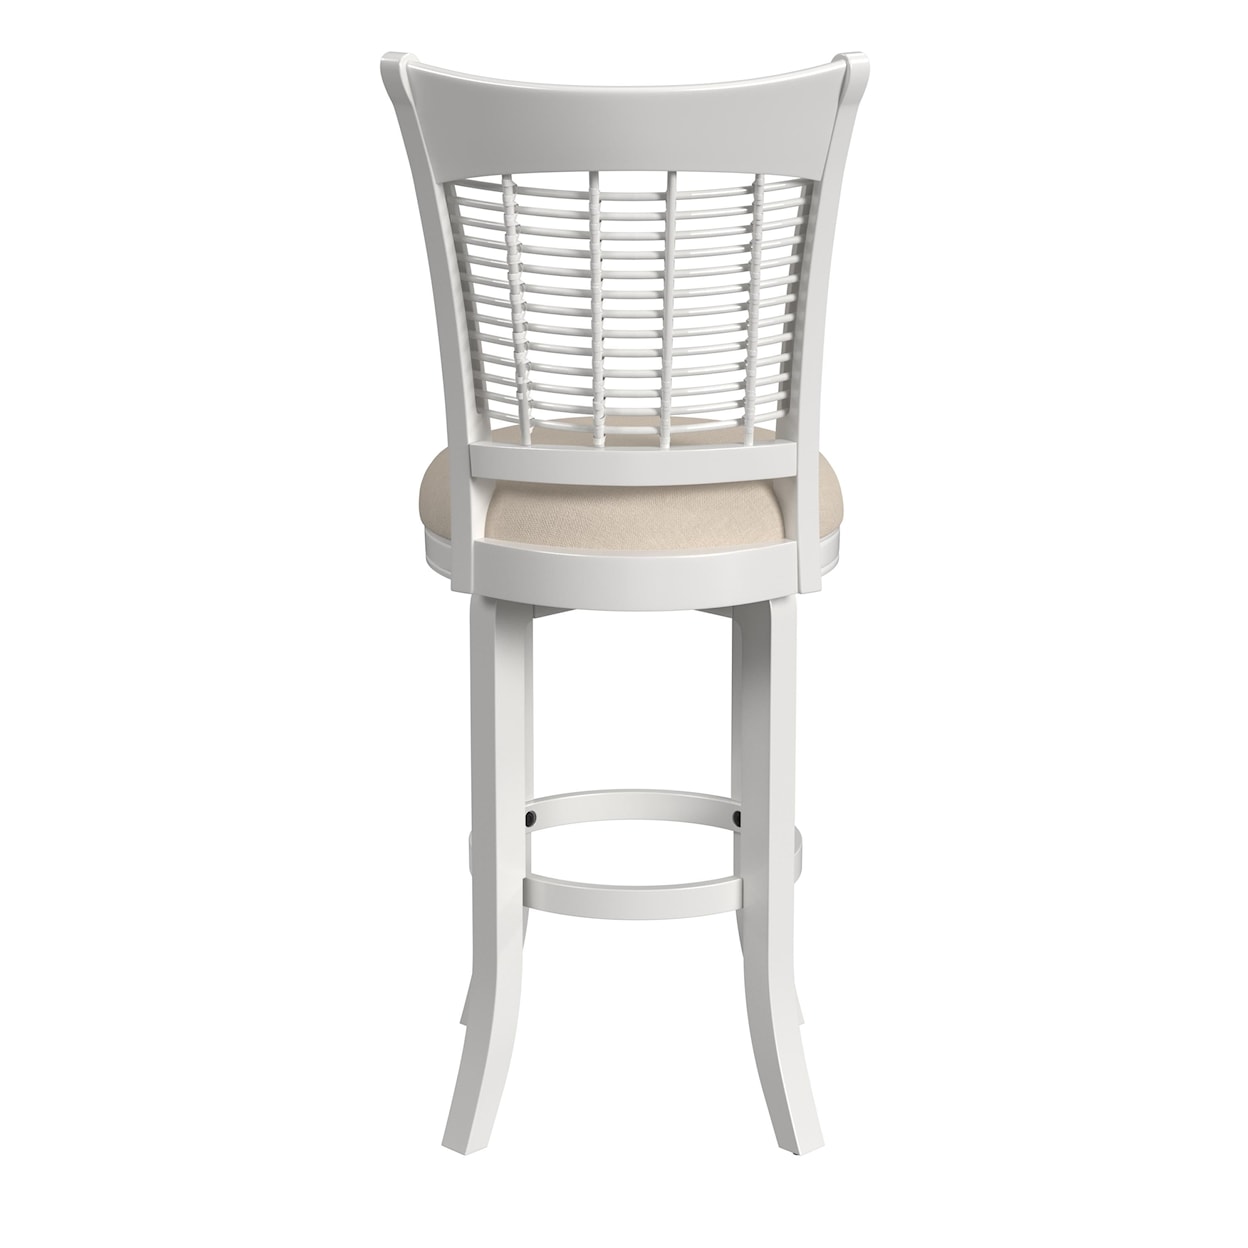 Hillsdale Bayberry Barstool